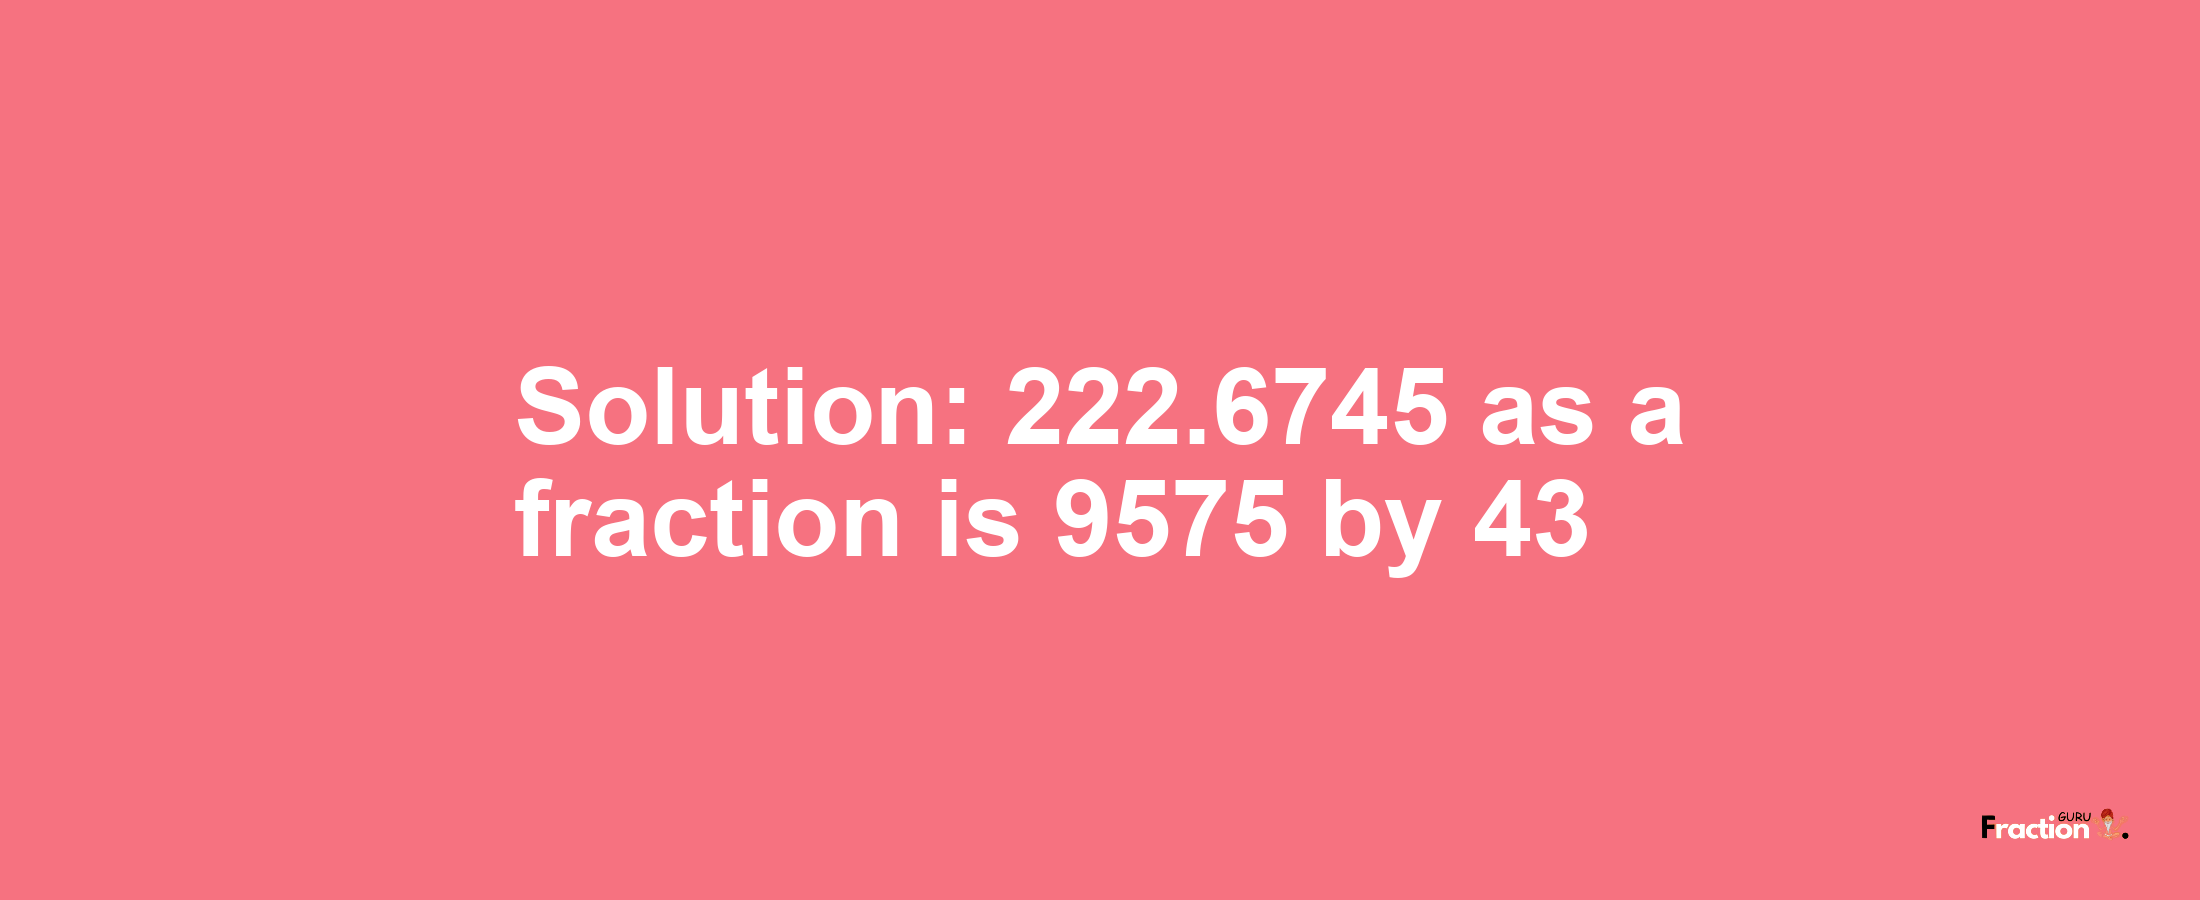 Solution:222.6745 as a fraction is 9575/43